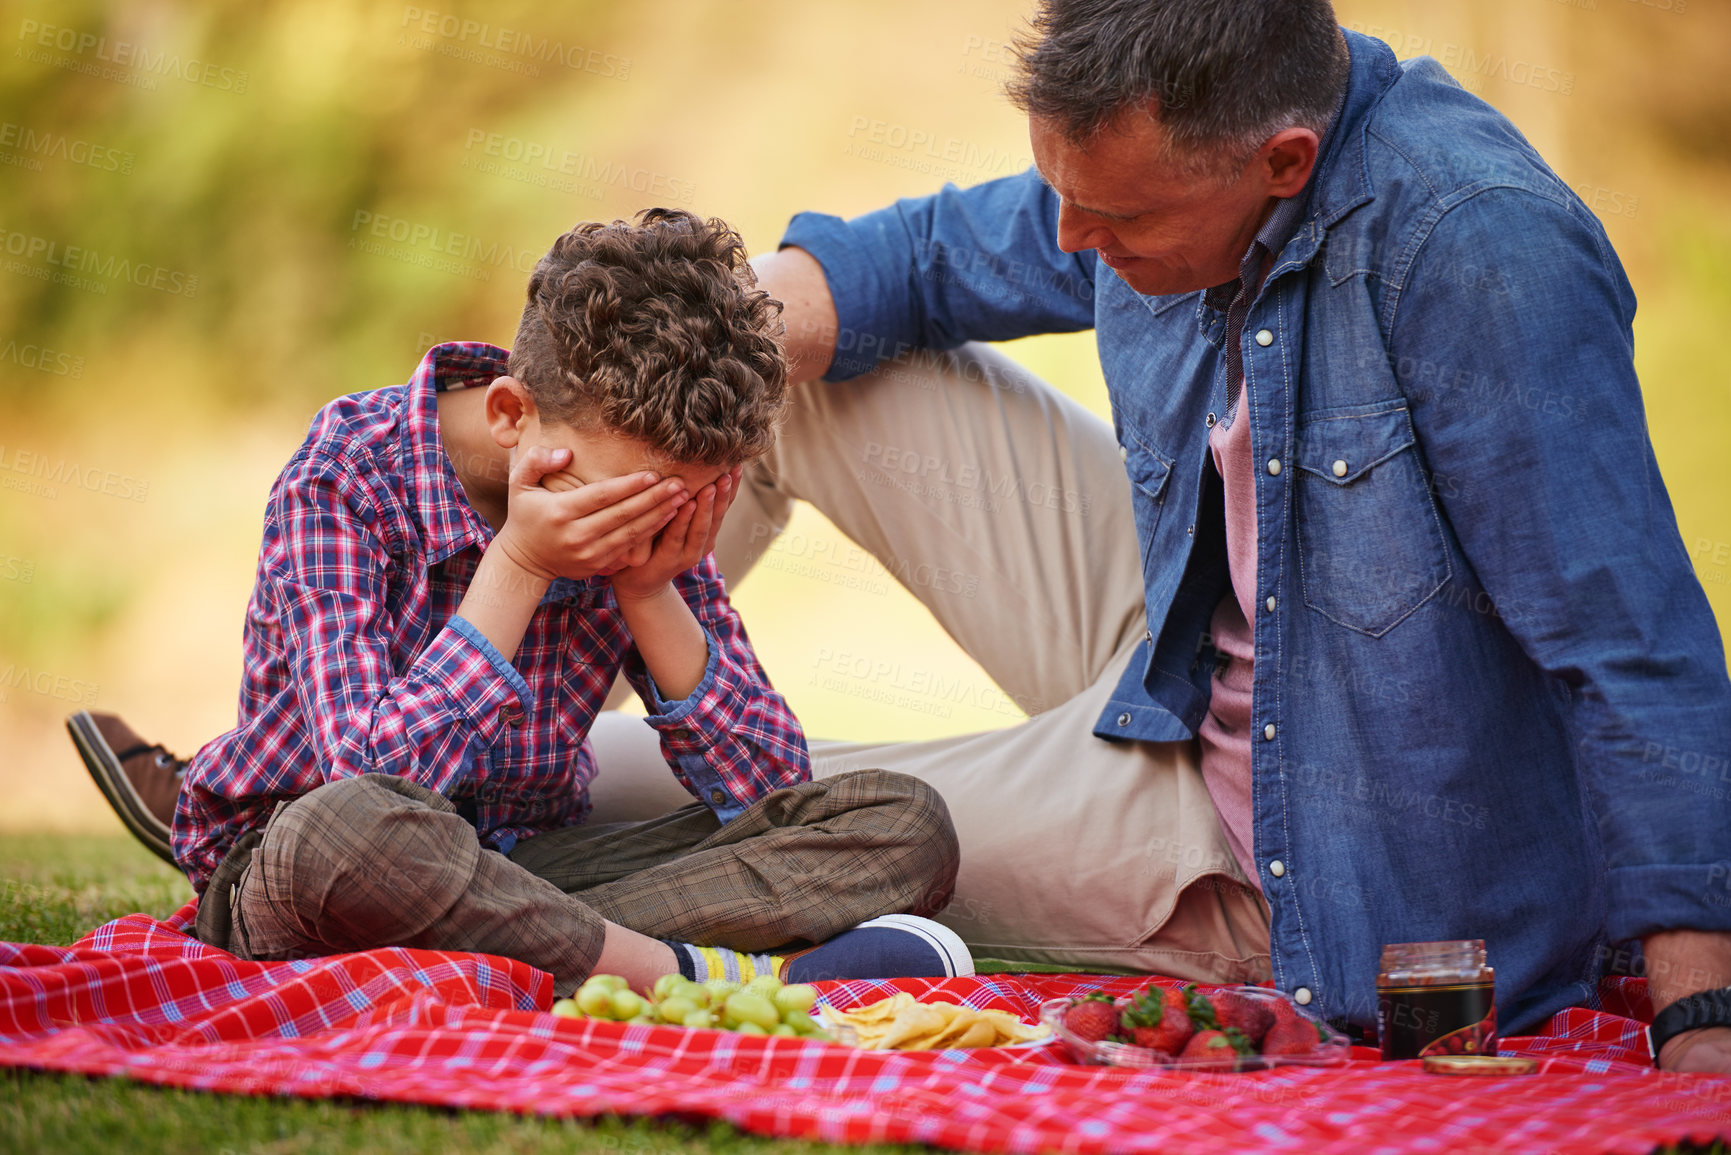 Buy stock photo Shot of a father comforting his young son while sitting in a park